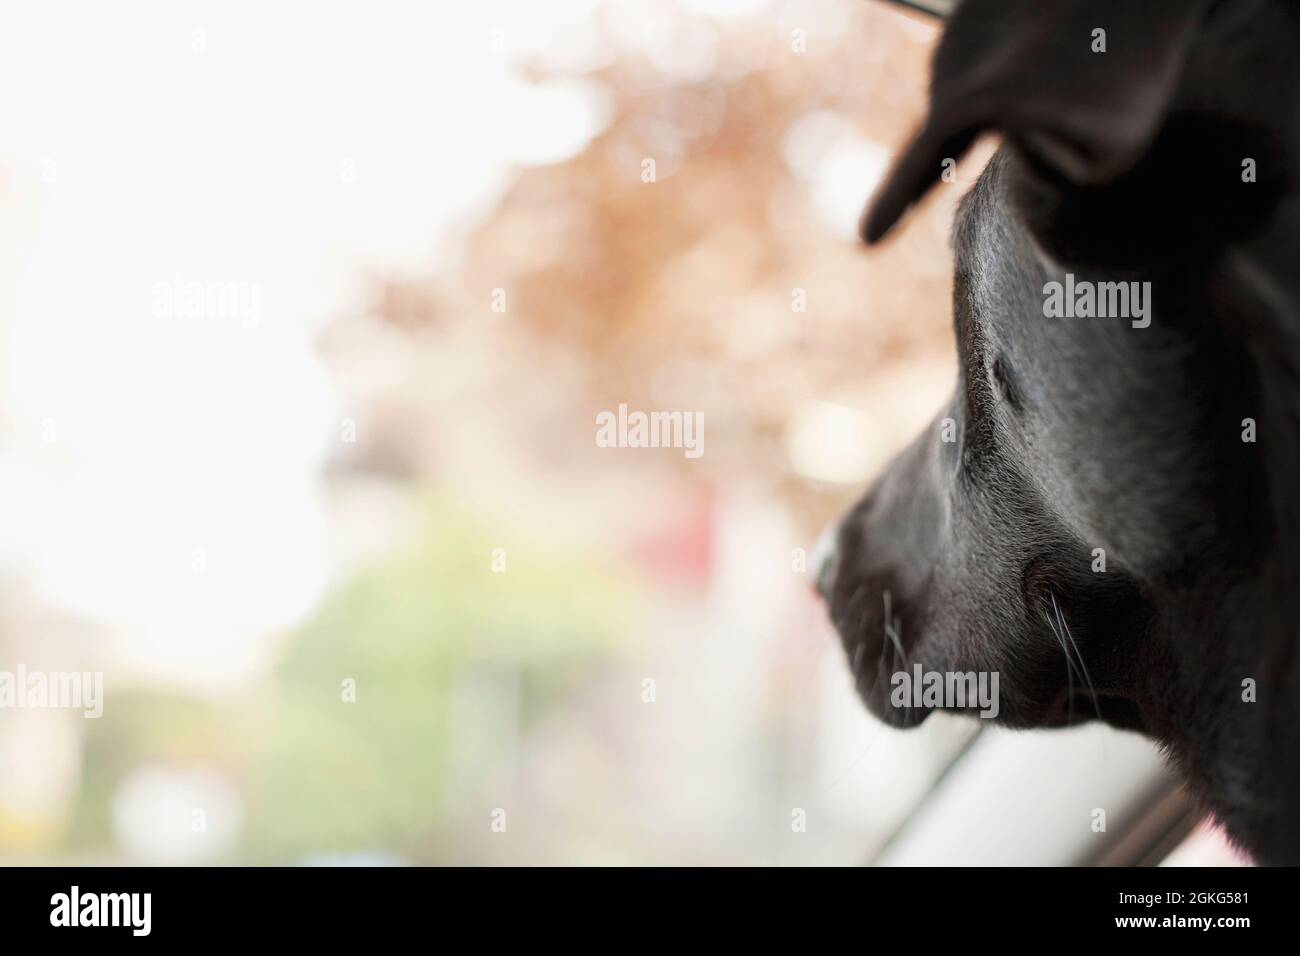 Large black dog looking out of vehicle windshield. Stock Photo